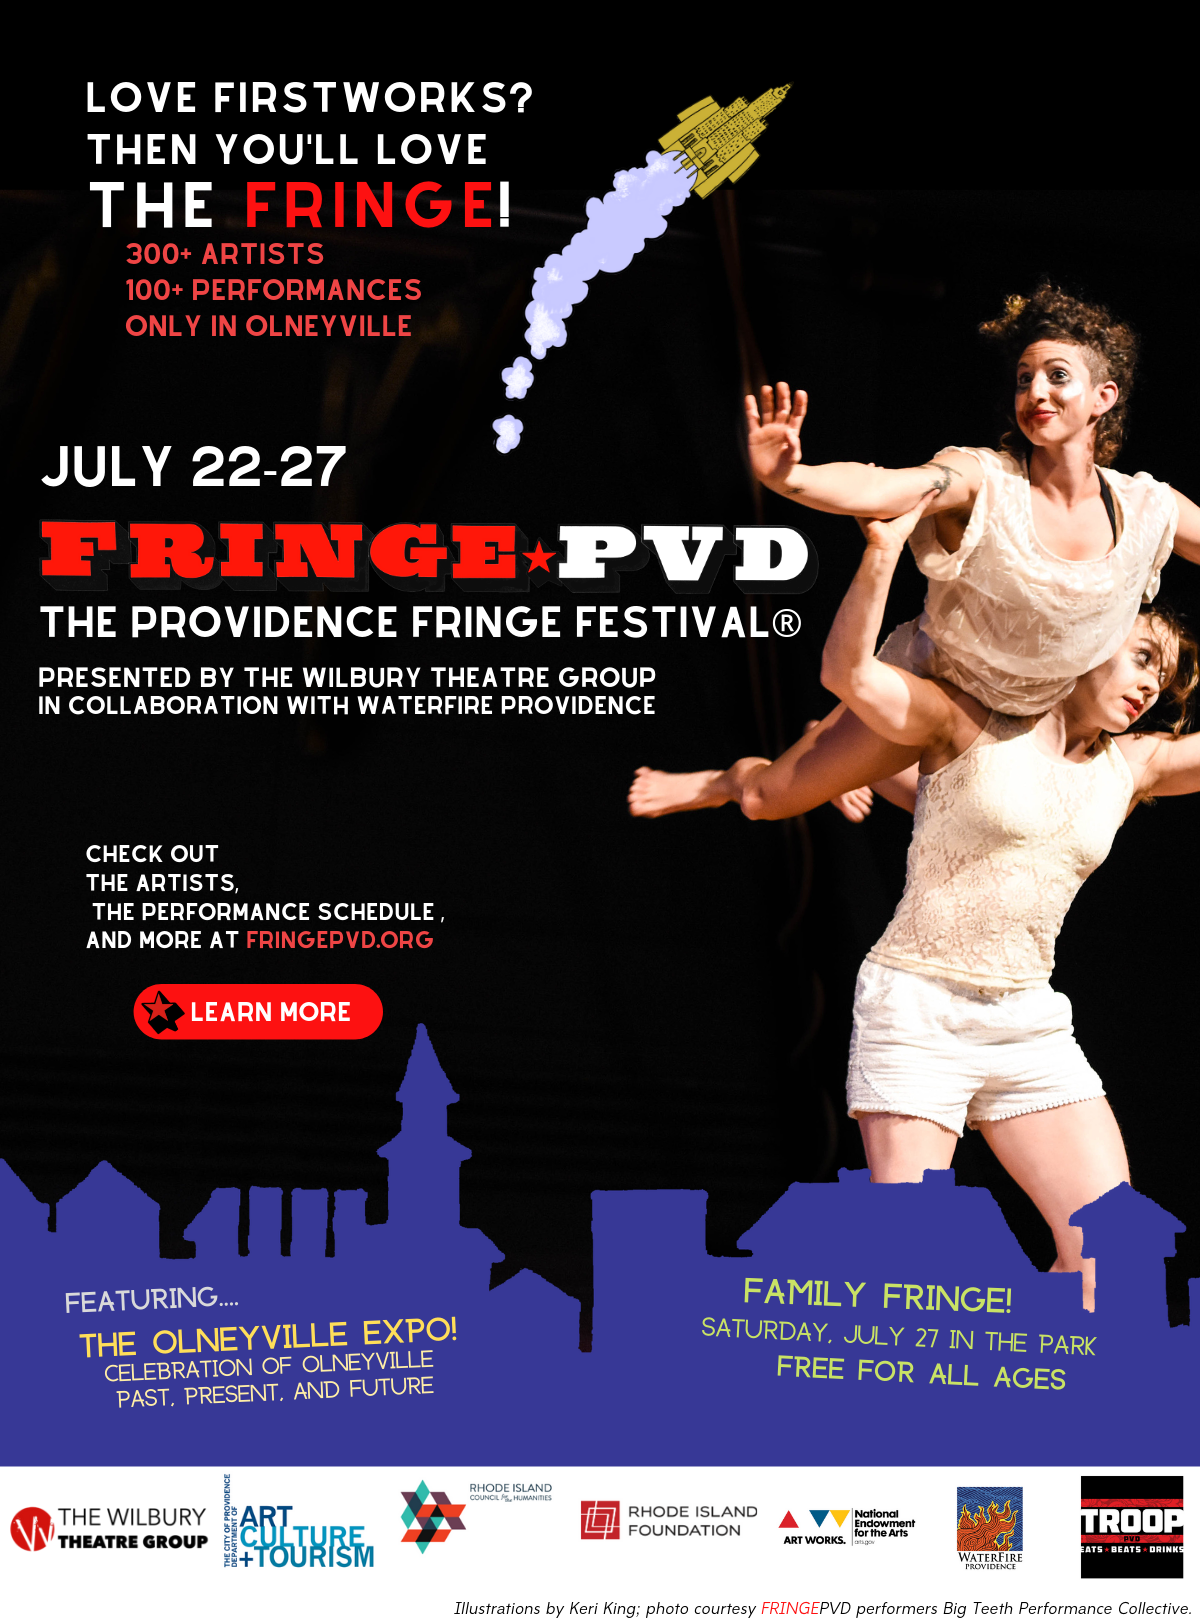 Love FirstWorks? Then You'll Love THE FRINGE! 300+ Artists, 100+ Performances - only in Olneyville. July 22-27 - The Providence Fringe Festival - Presented by the Wilbury Theatre Group in collaboration with Waterfire Providence